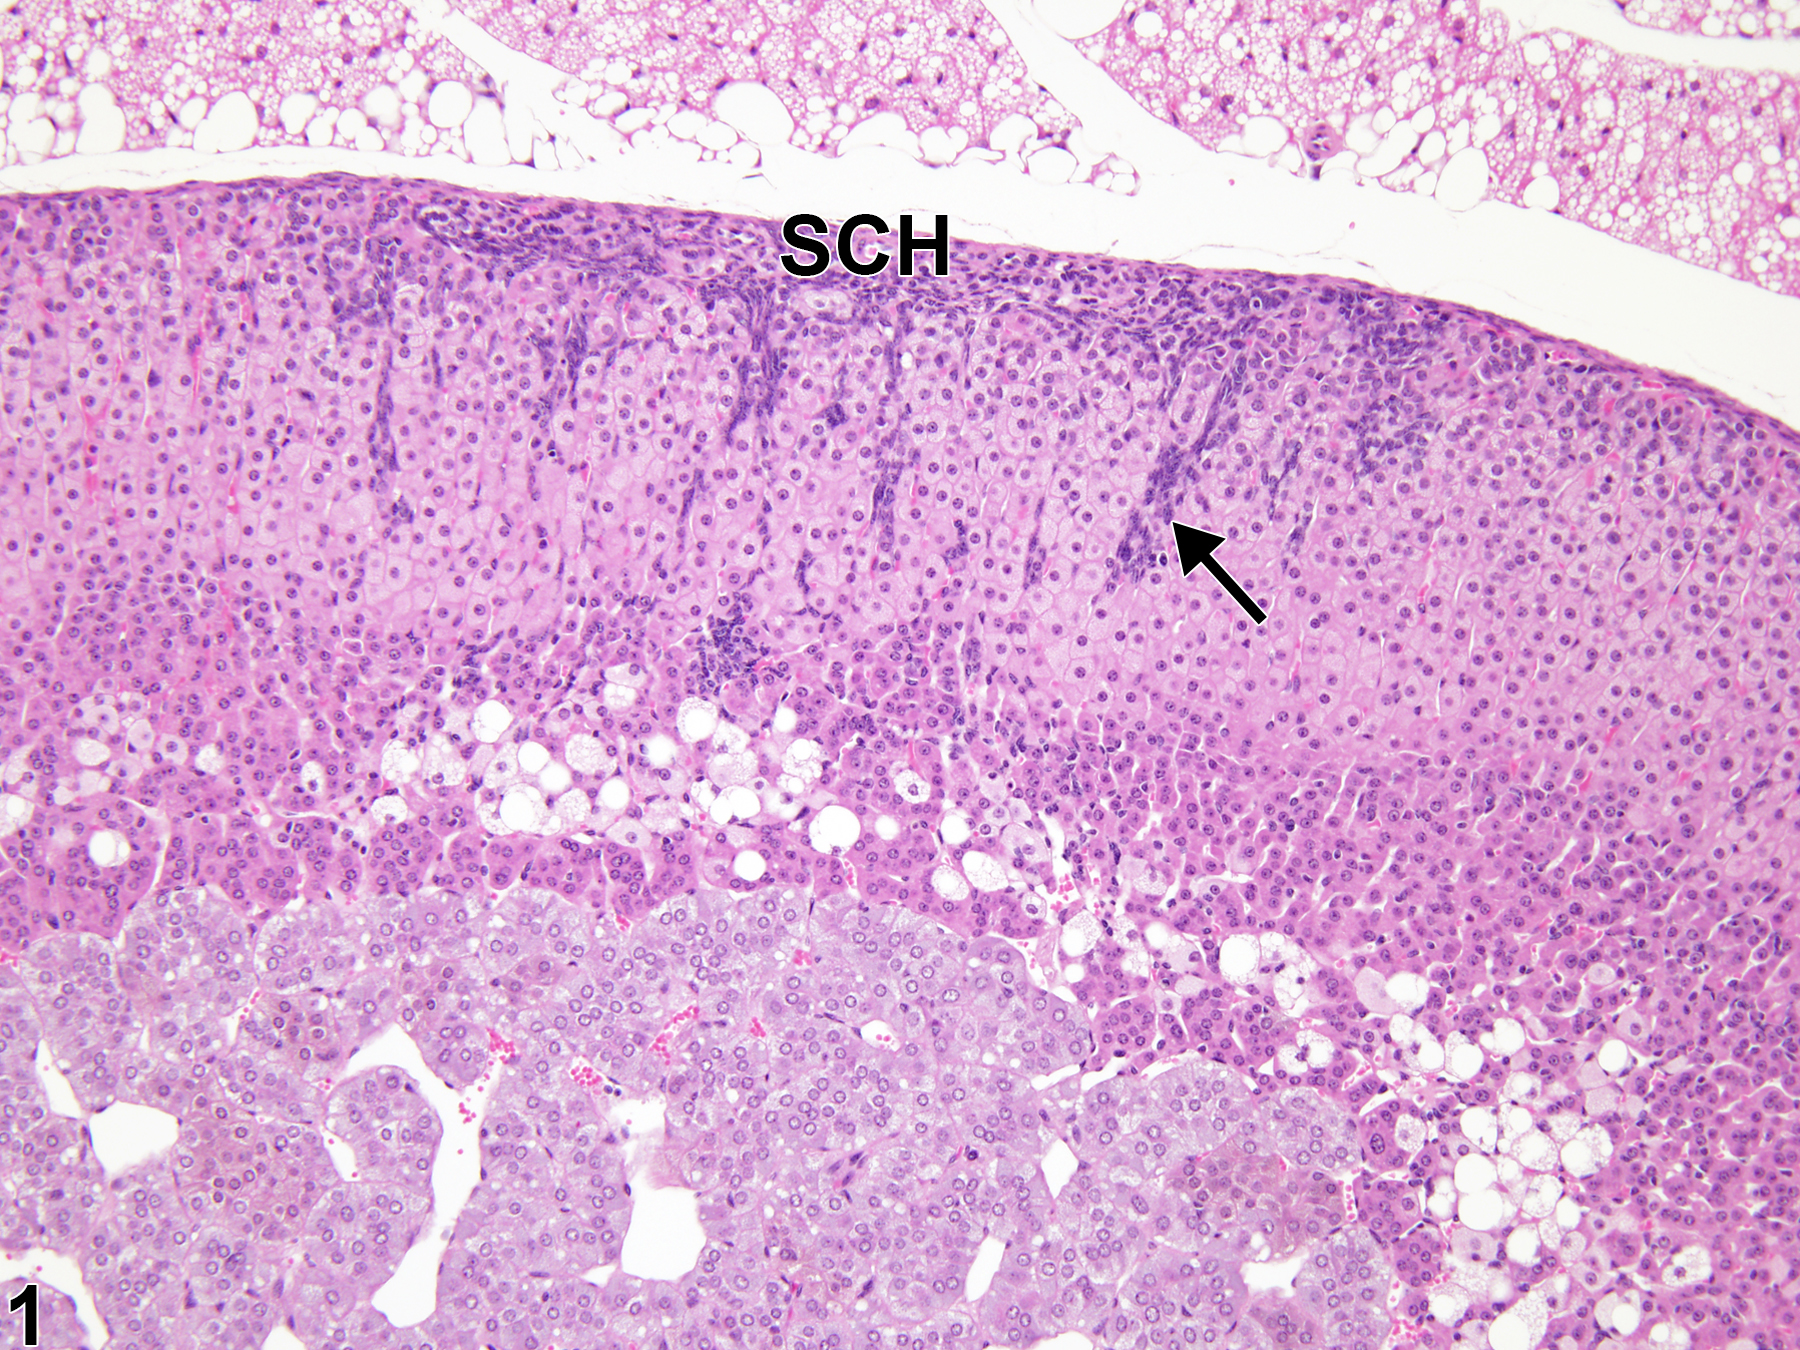 Image of hyperplasia, subcapsular in the adrenal gland cortex from a female B6C3F1/N mouse in a subchronic study